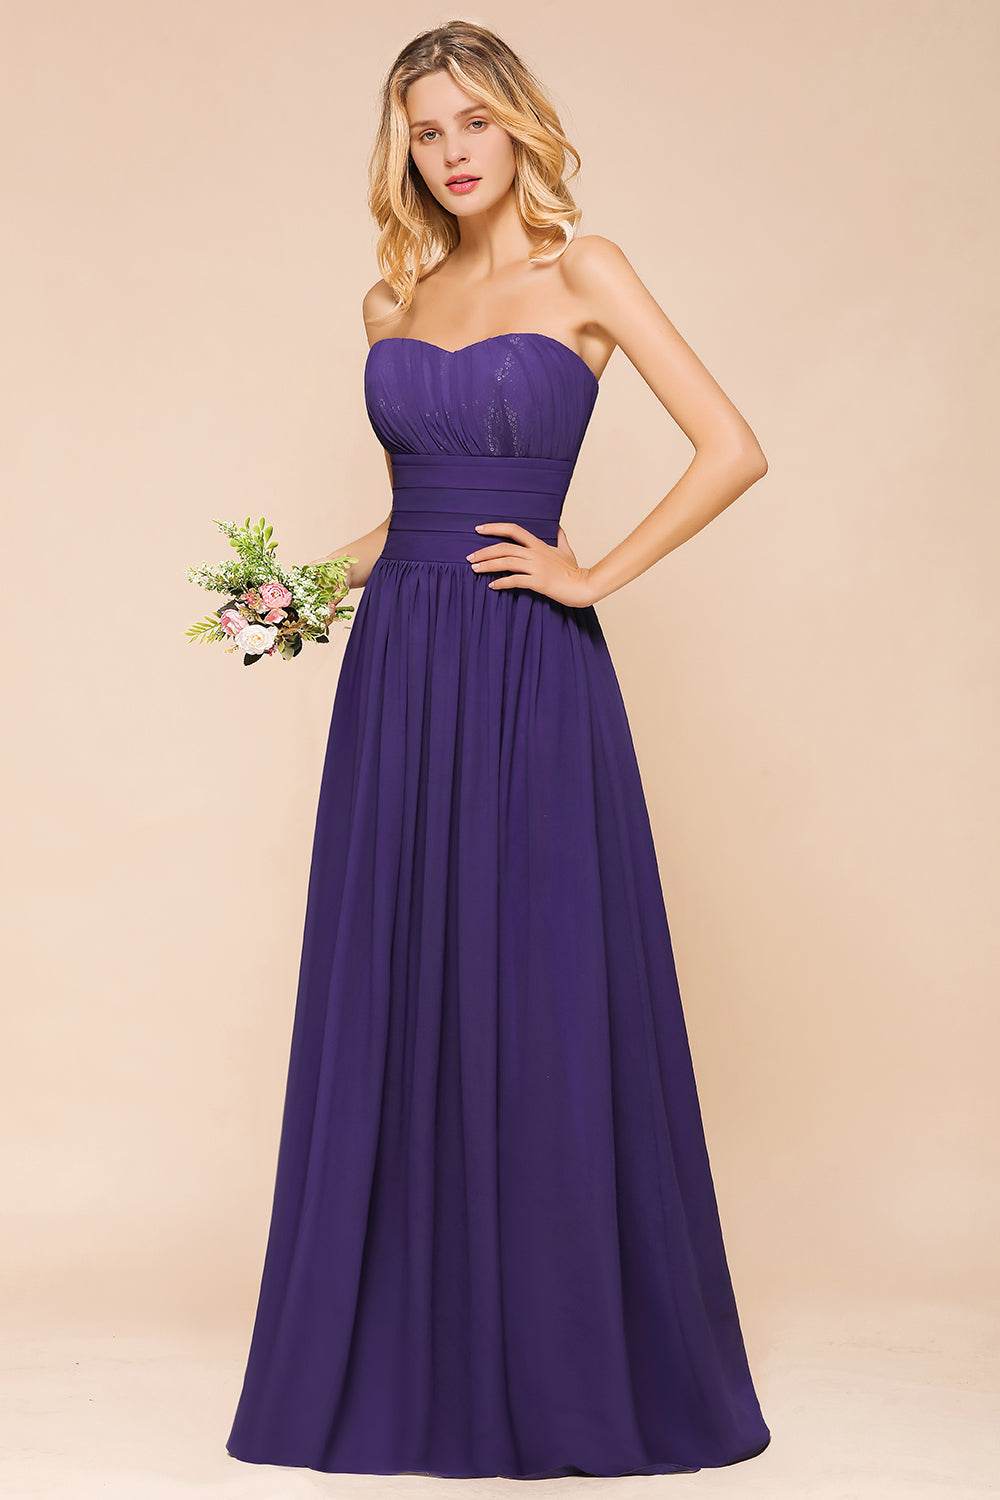 Affordable Sweetheart Sequins Regency Bridesmaid Dress with Pleats-27dress